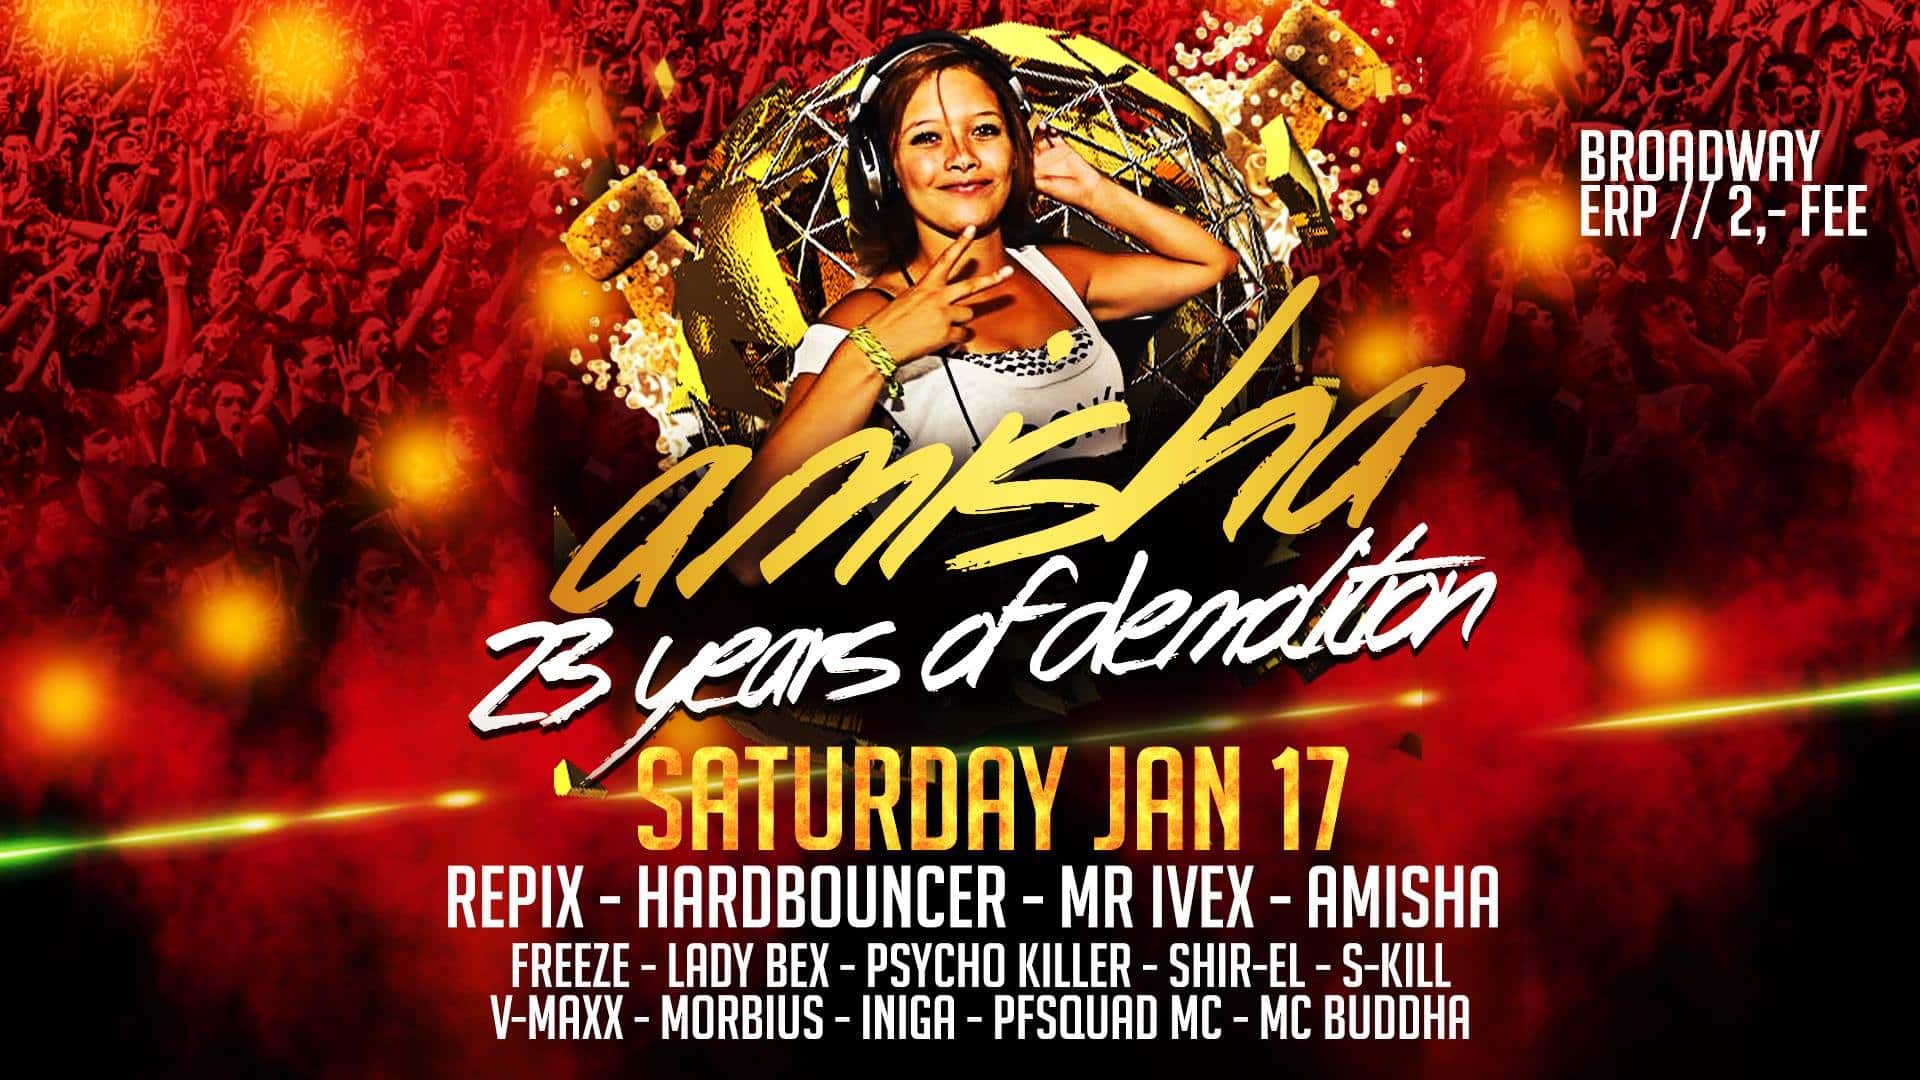 2015-01-17-amishas-b-day-23-years-of-demolition-broadway-event